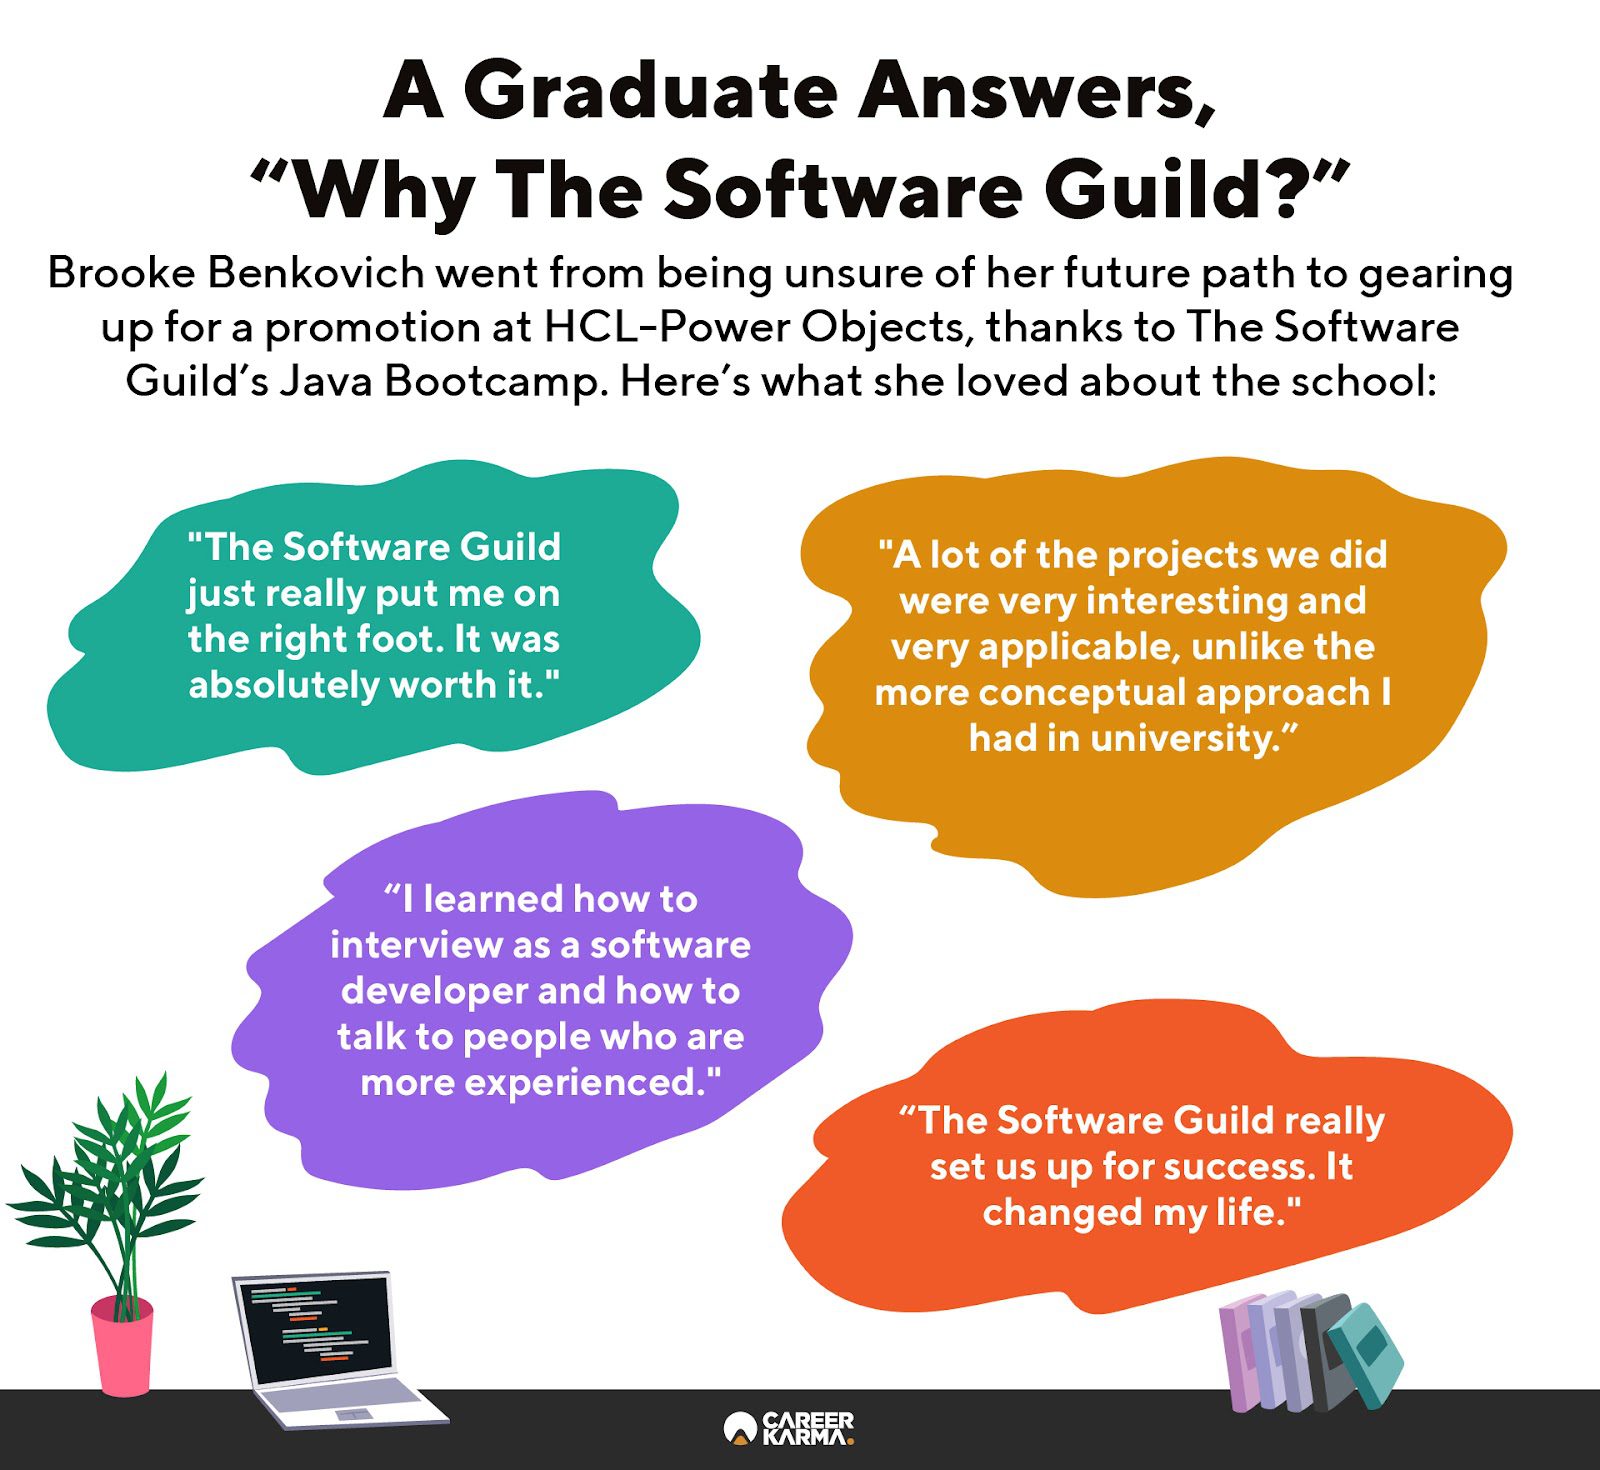 An infographic featuring a graduate’s review of The Software Guild